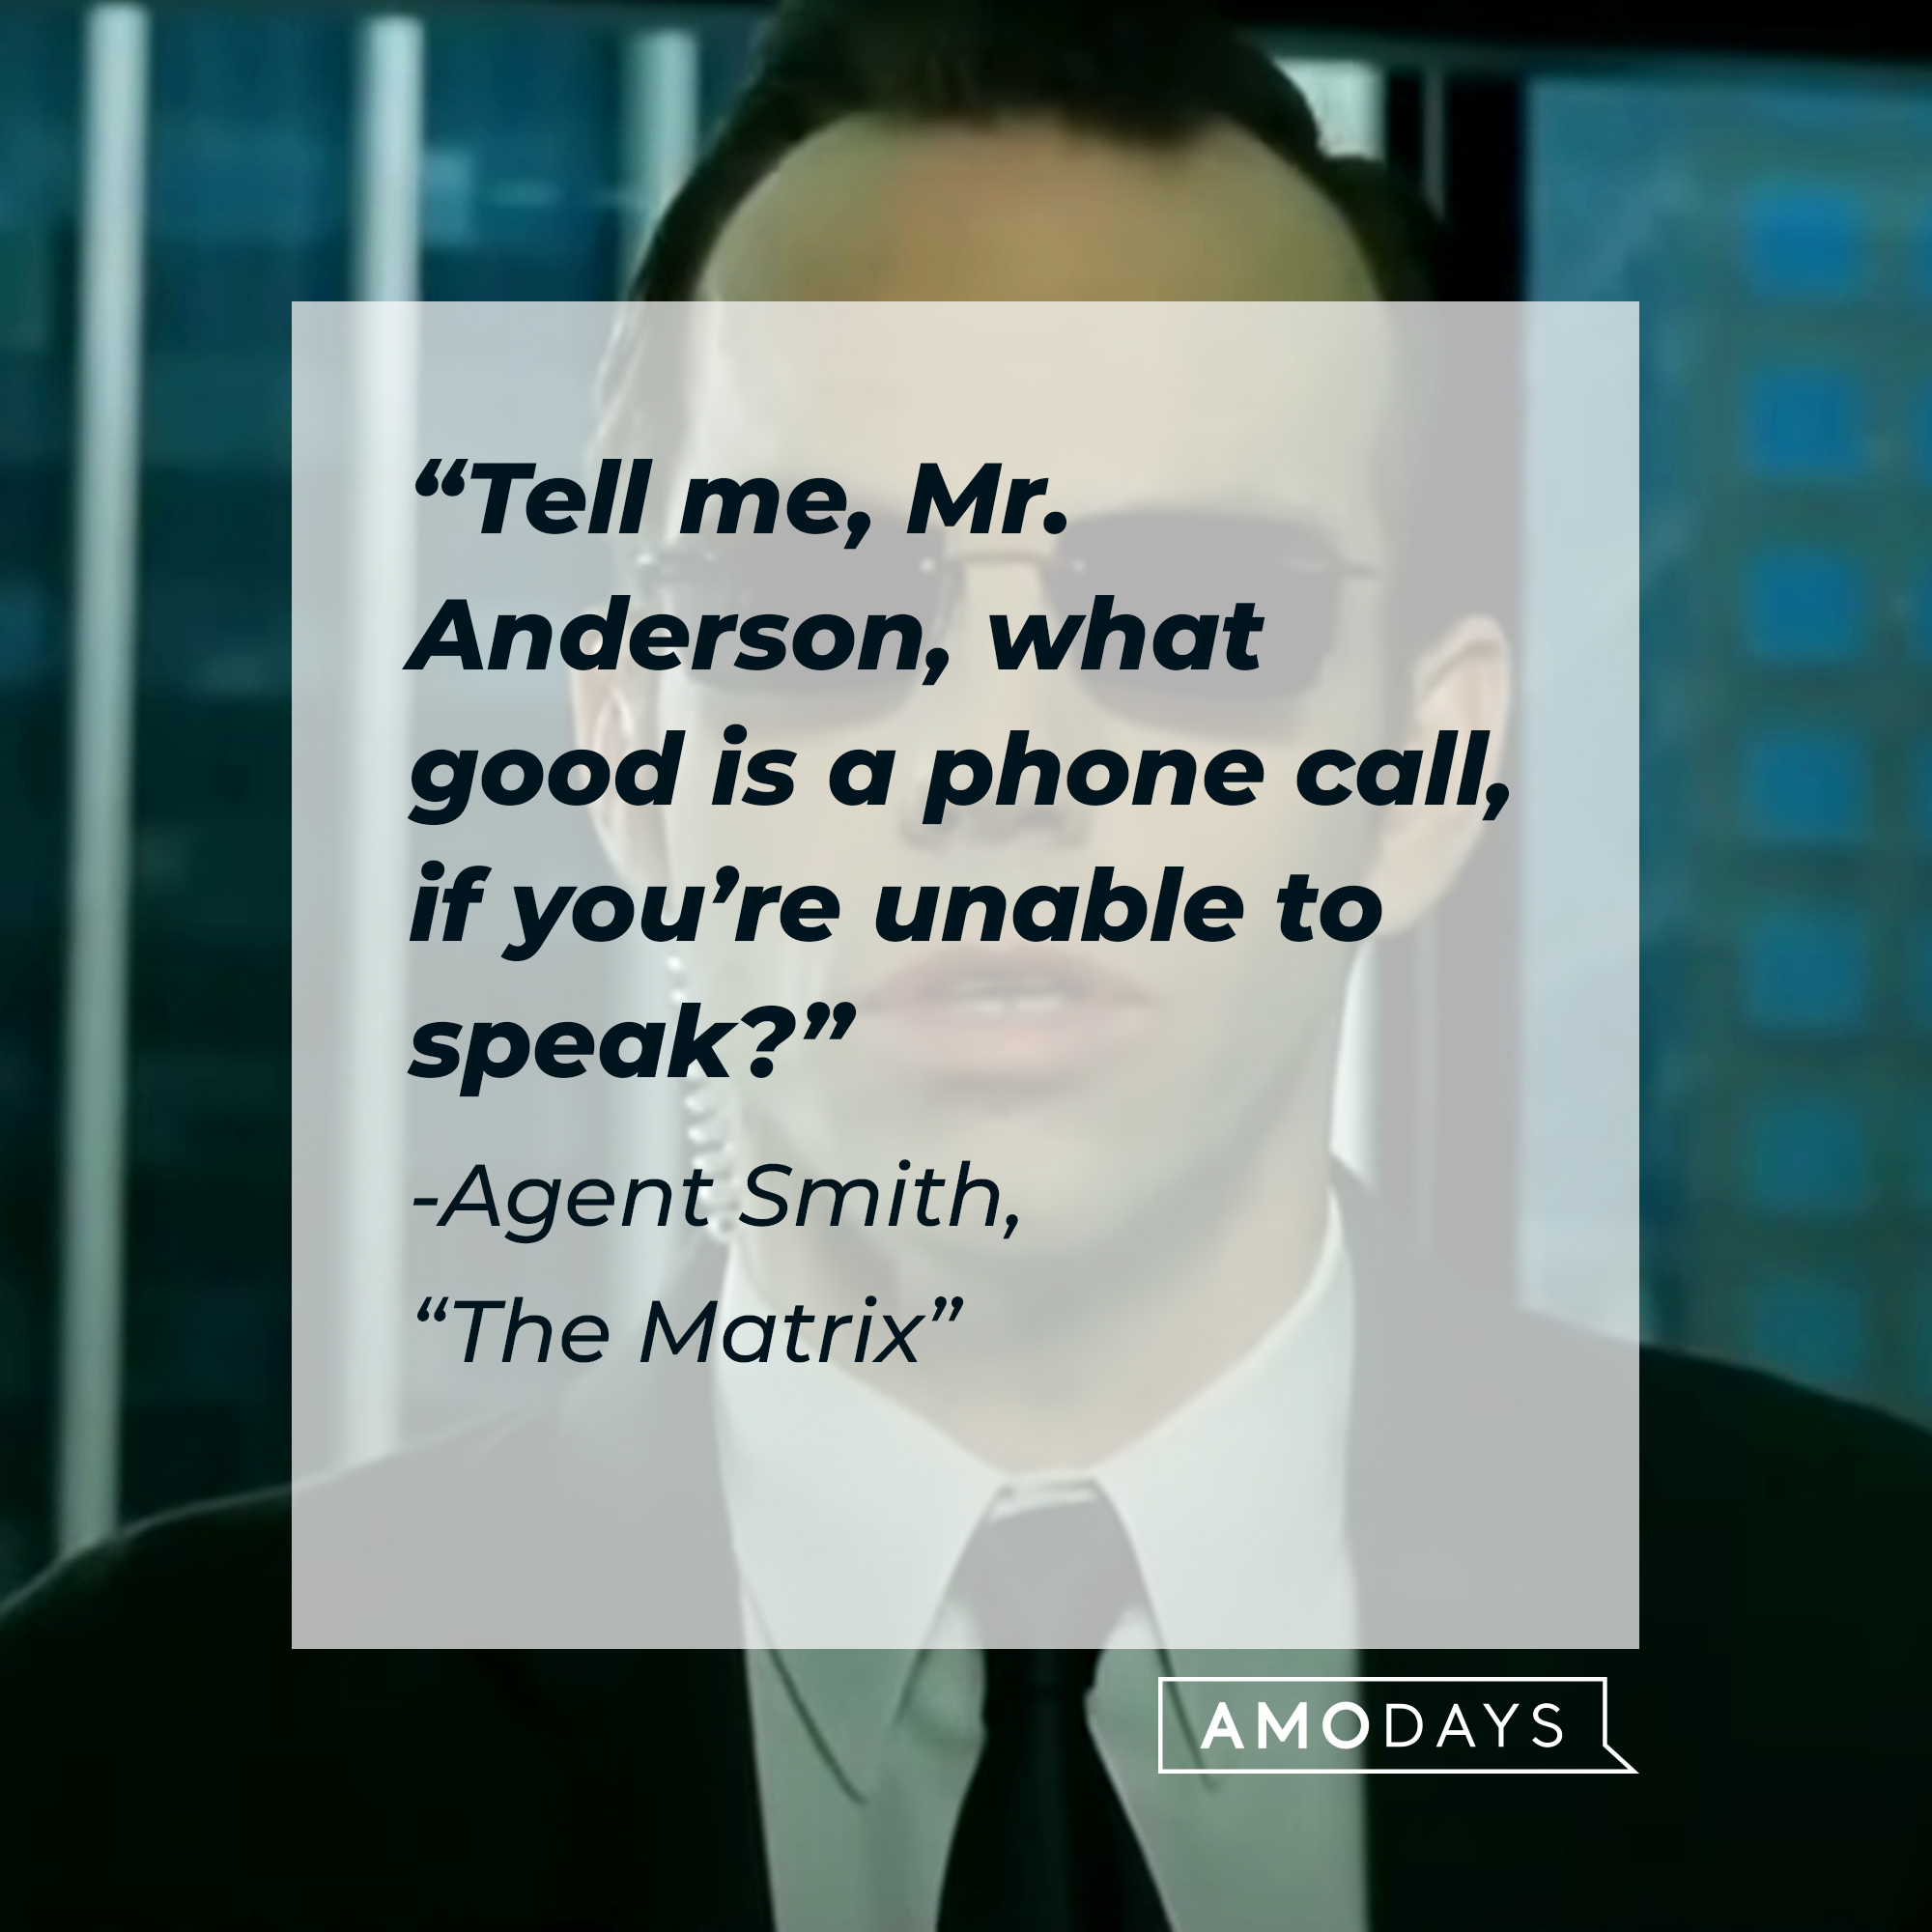 Agent Smith with his quote: “Tell me, Mr. Anderson, what good is a phone call, if you’re unable to speak?” | Source: Facebook.com/TheMatrixMovie